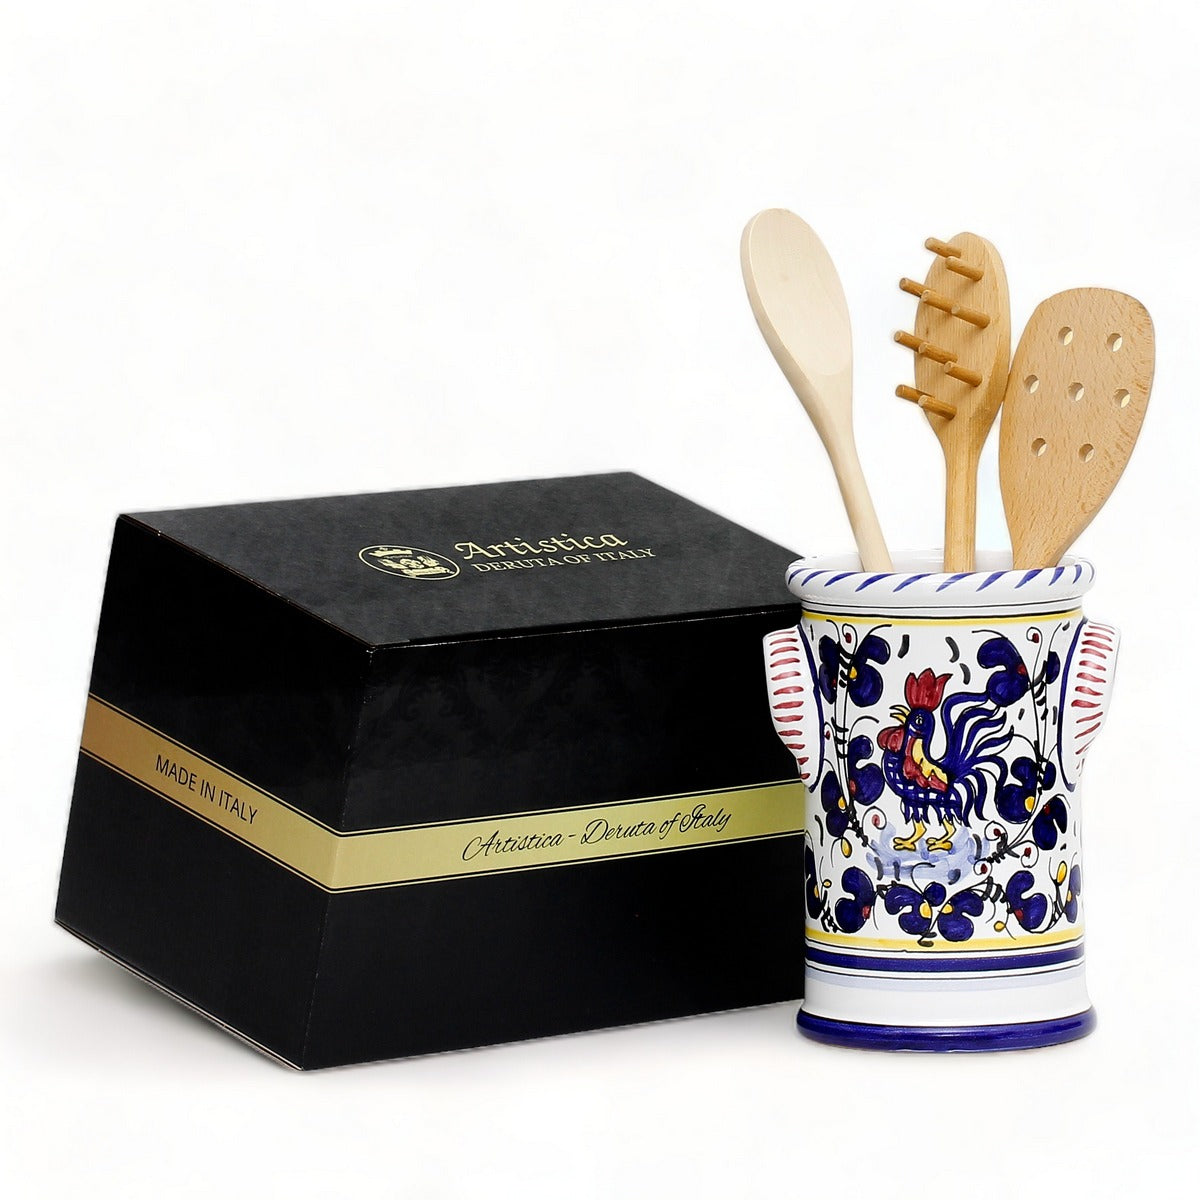 GIFT BOX: With authentic Deruta hand painted ceramic - ORVIETO BLUE ROOSTER: UTENSIL HOLDER